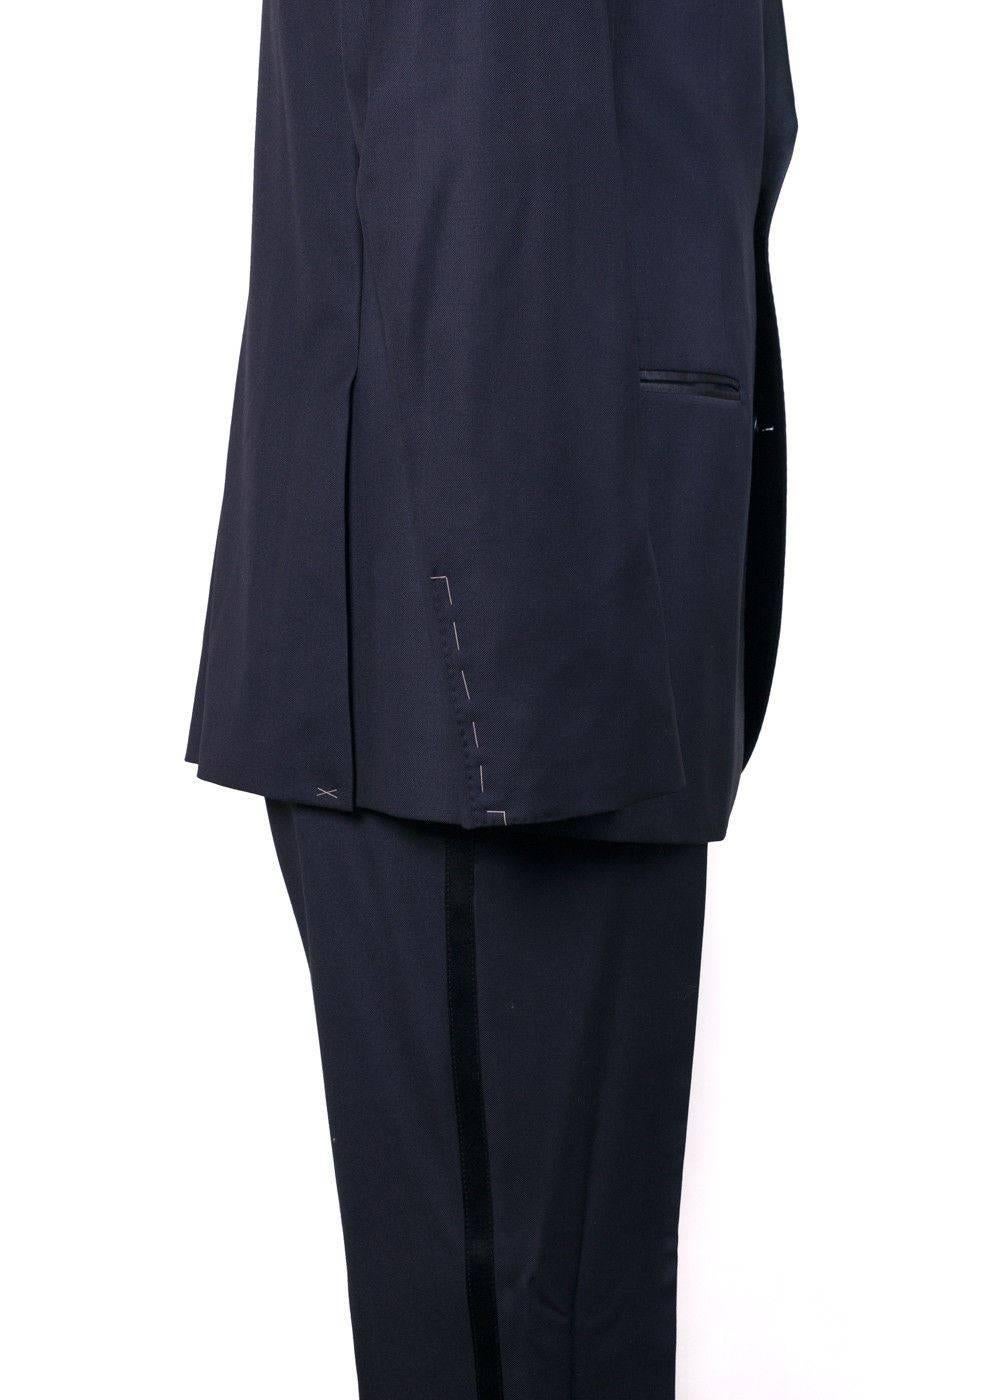 Brand New Brunello Cucinelli Satin Lapel Suit
Retails in Stores & Online for $7795
Men's Size EUR 54 R / US 44 R Fits True to Size

Adopt that air of deserving confidence in your Brunello Cucinellli Suit. This rich navy suit features a handsome